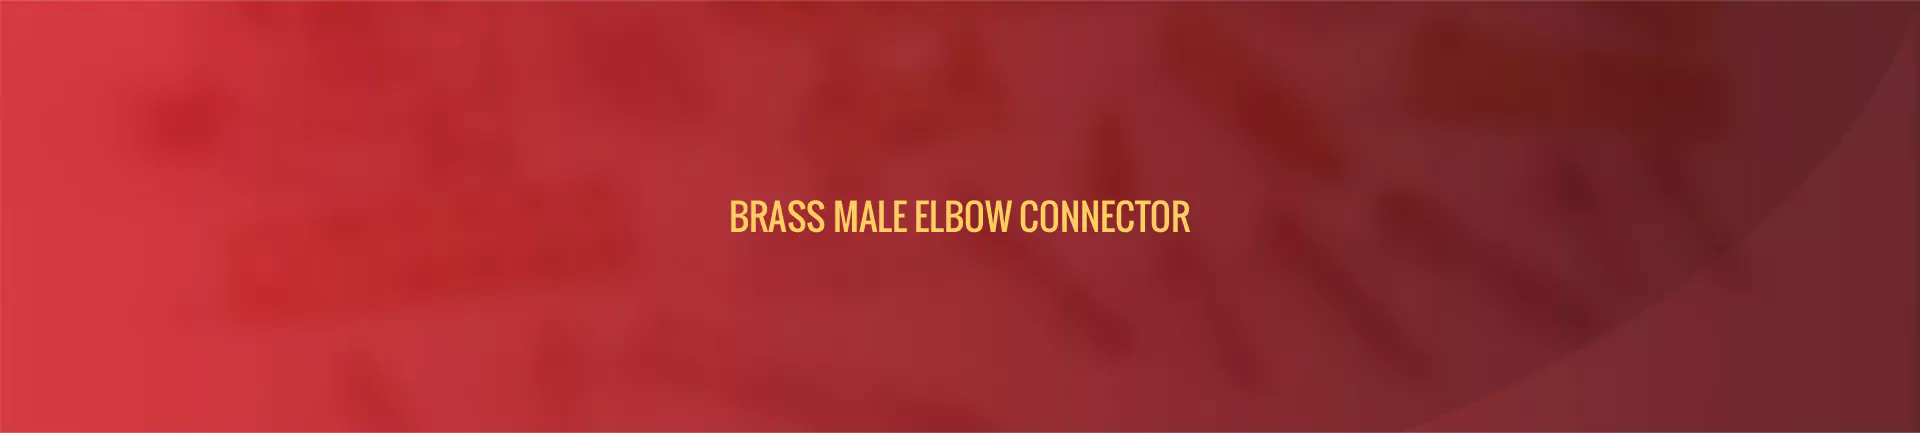 brass_male_elbow_connector-banner